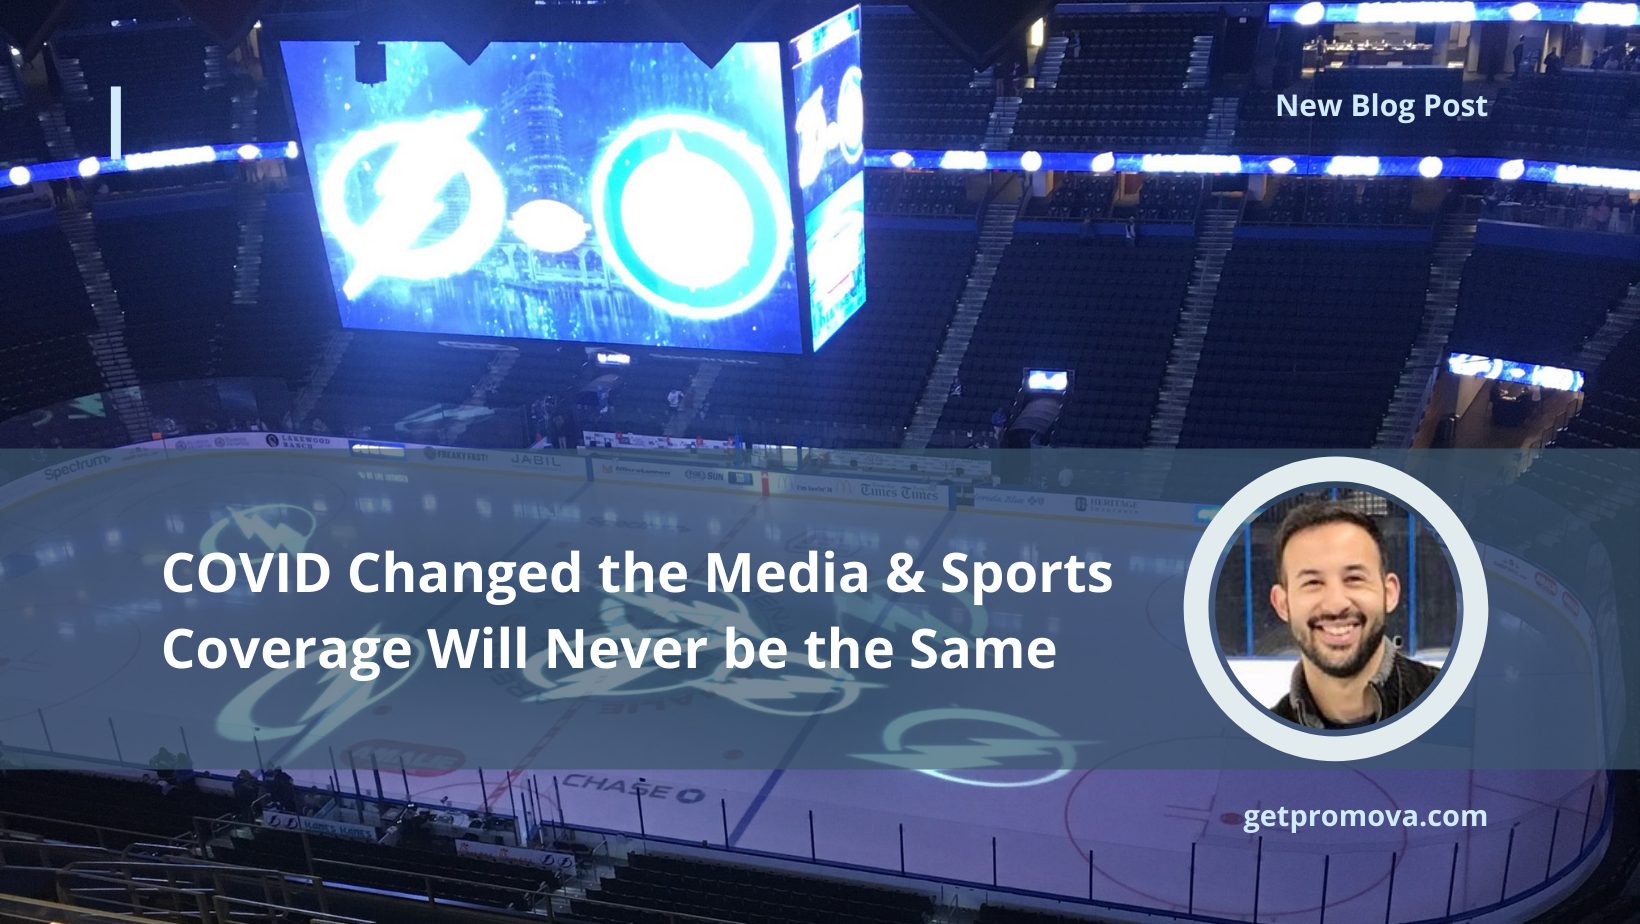 Featured image for “COVID Changed the Media & Sports Coverage Will Never be the Same”